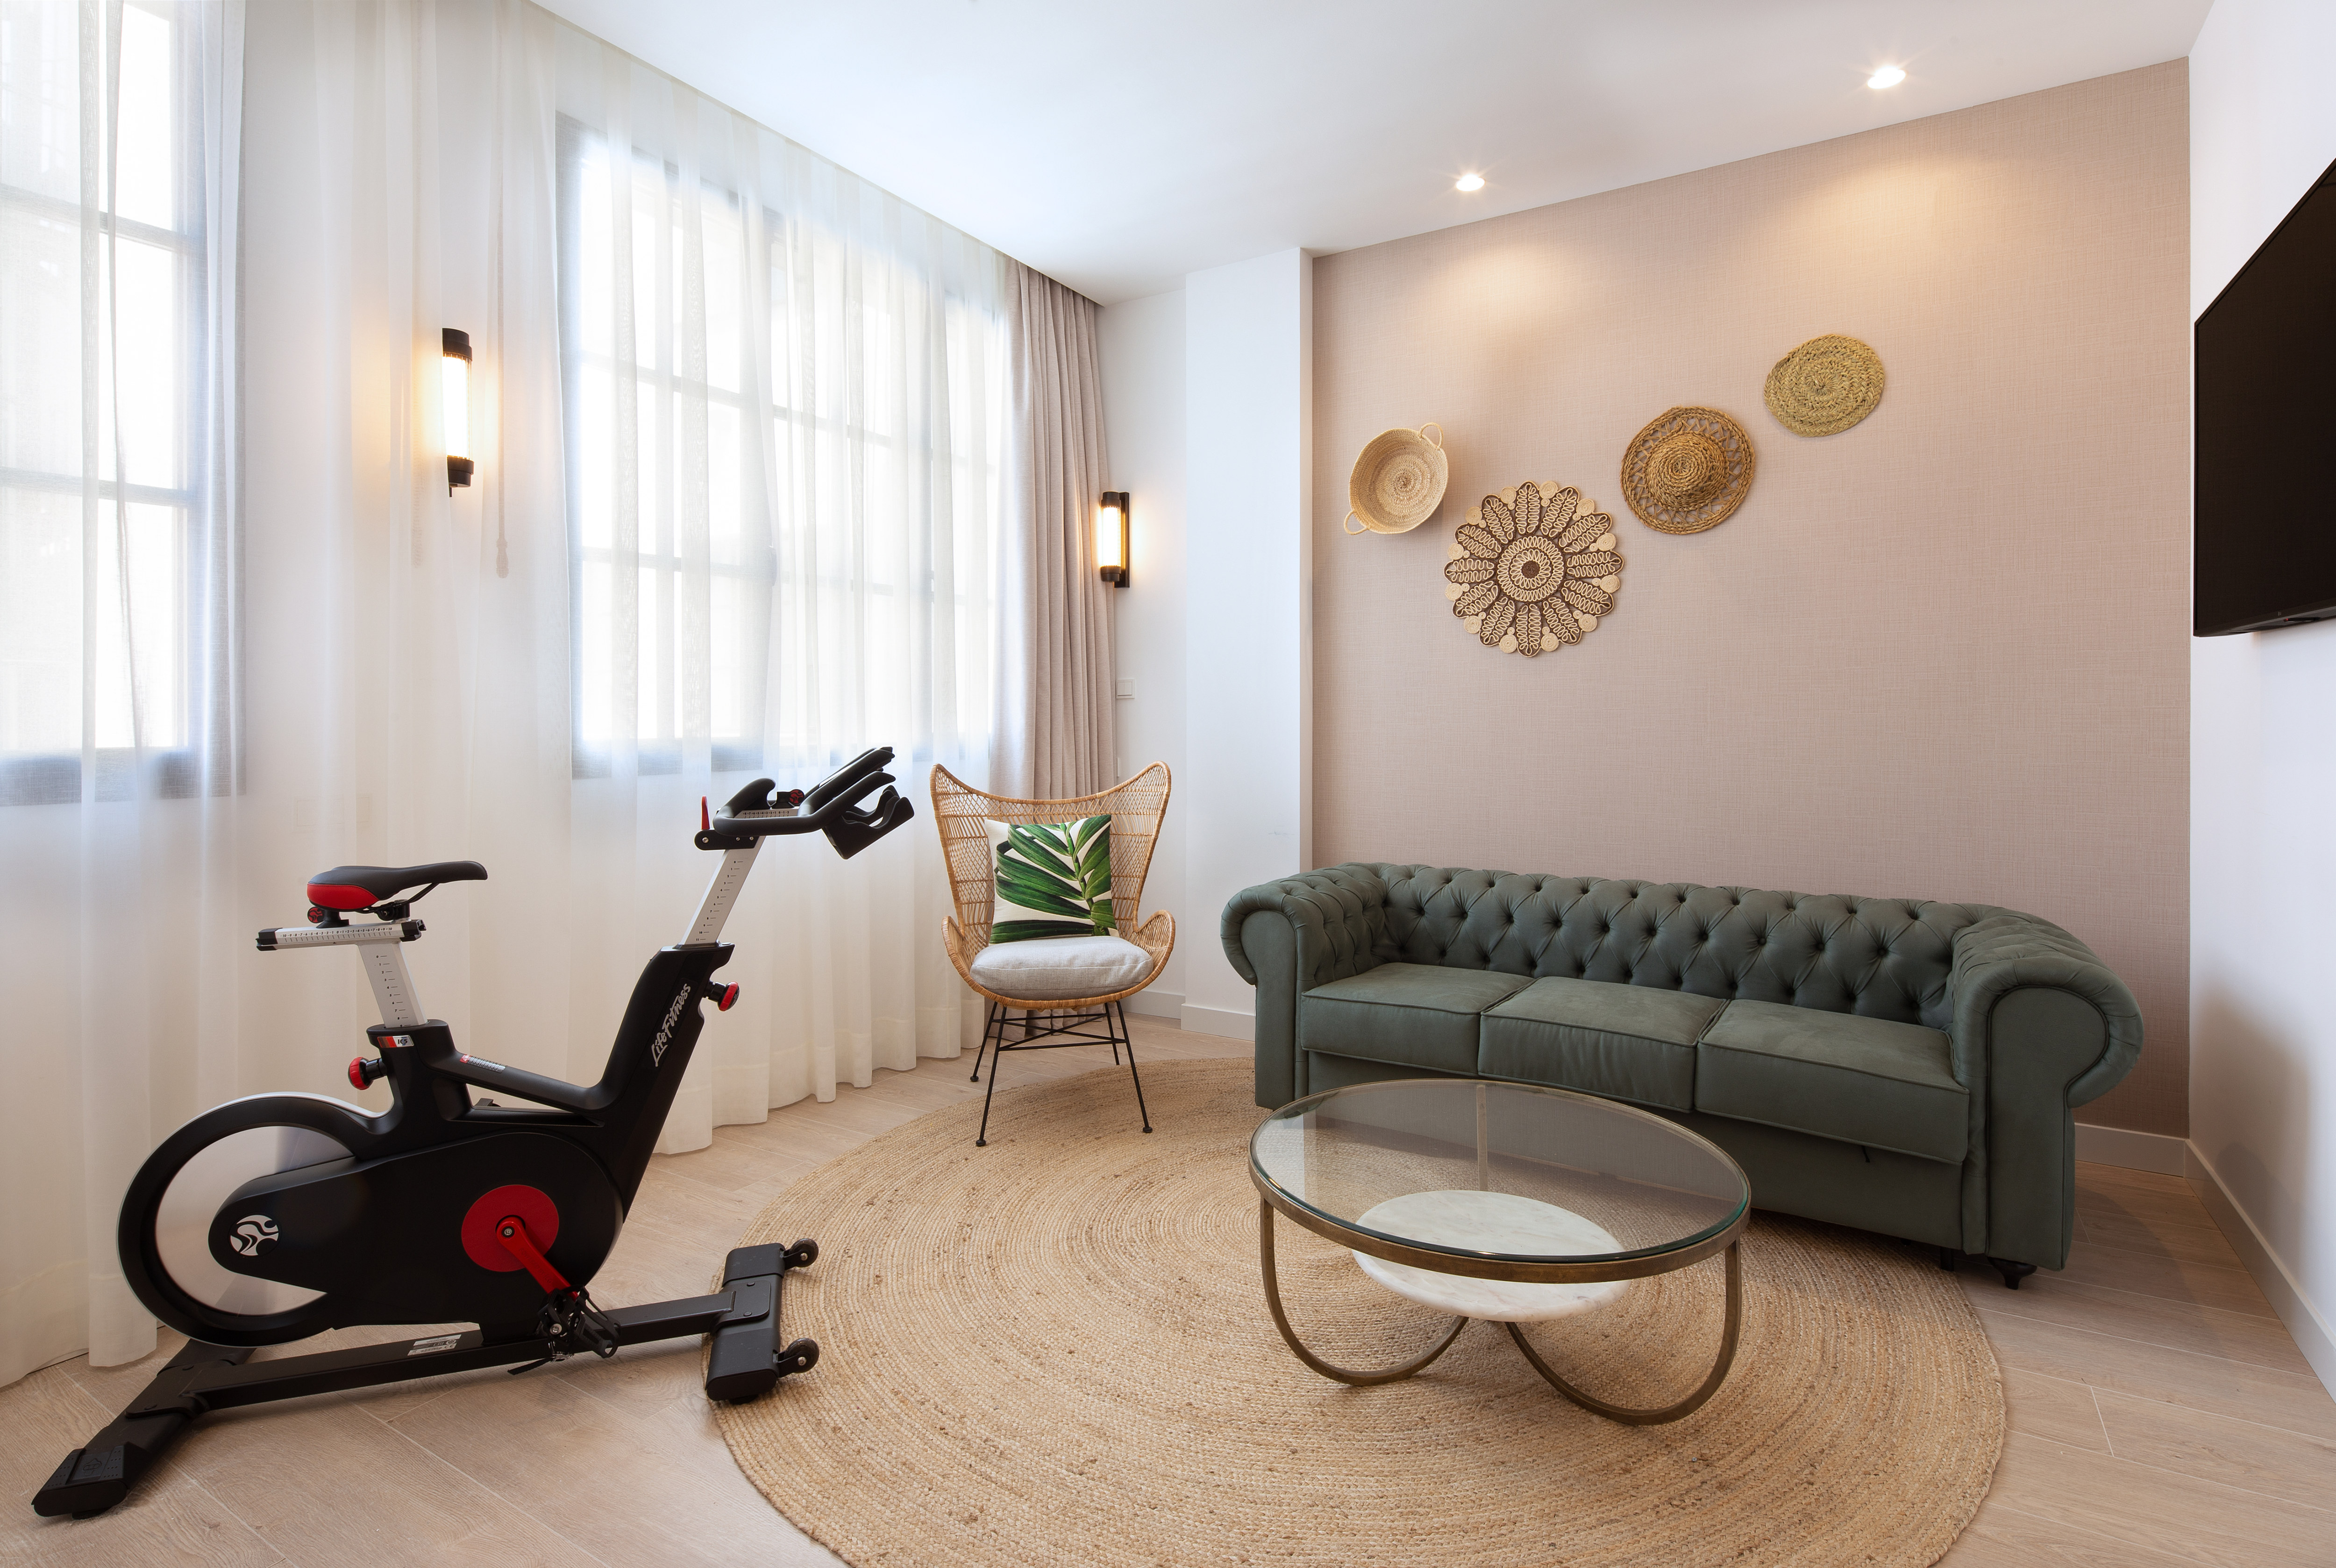 Living Area in Guest Room with Fitness Equipment